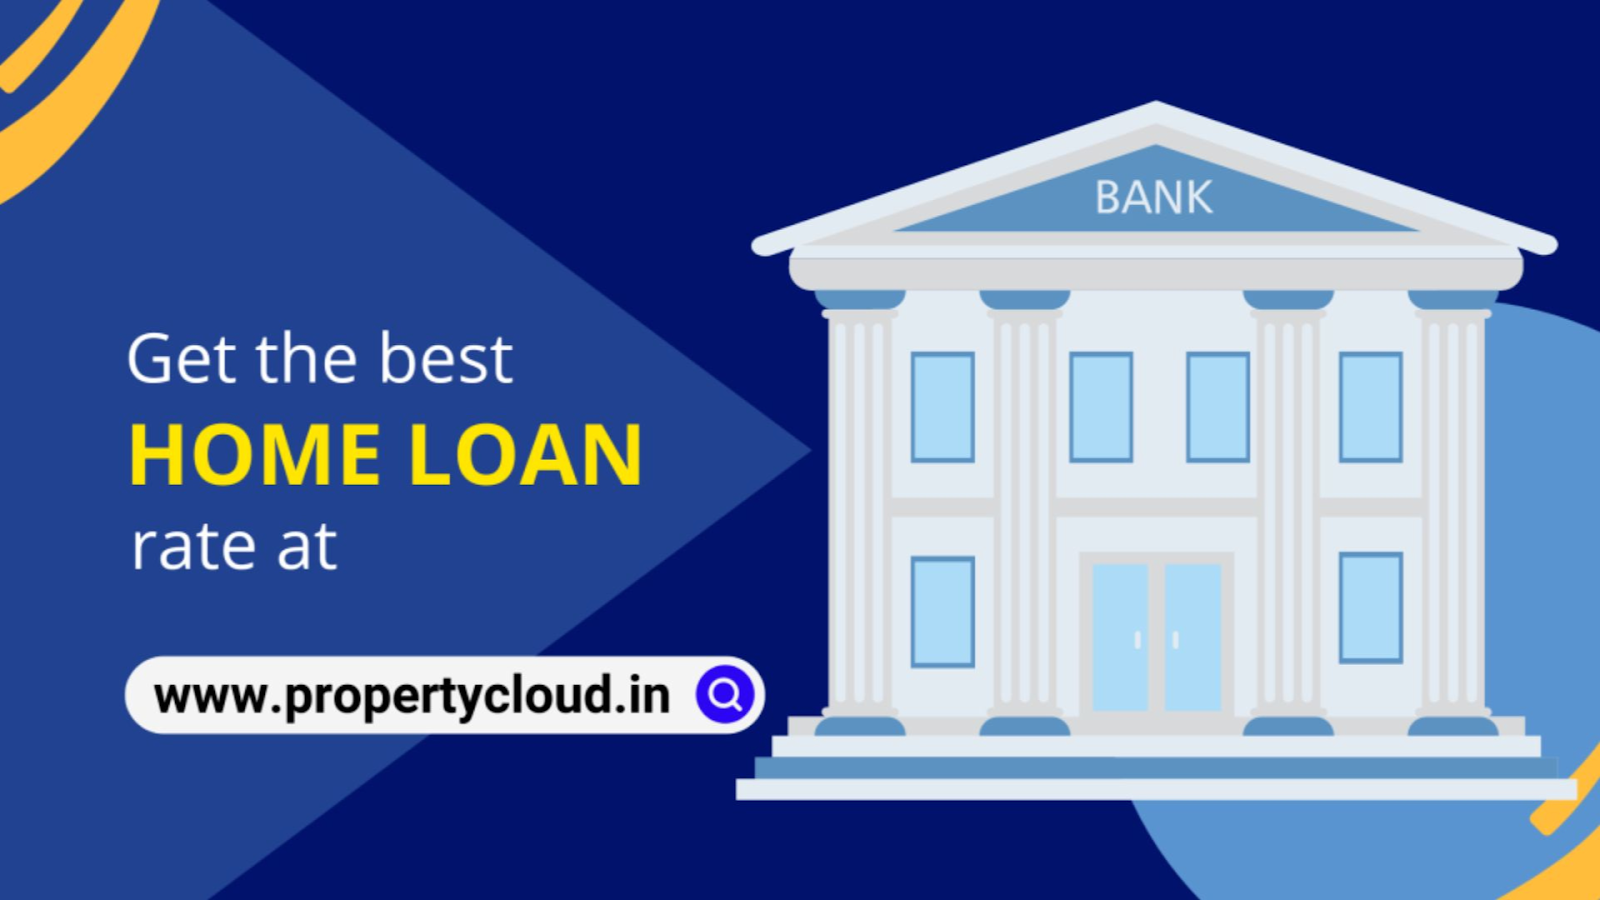 Get in touch with PropertyCloud, to get the best advice related to home loans at the best interest rate.